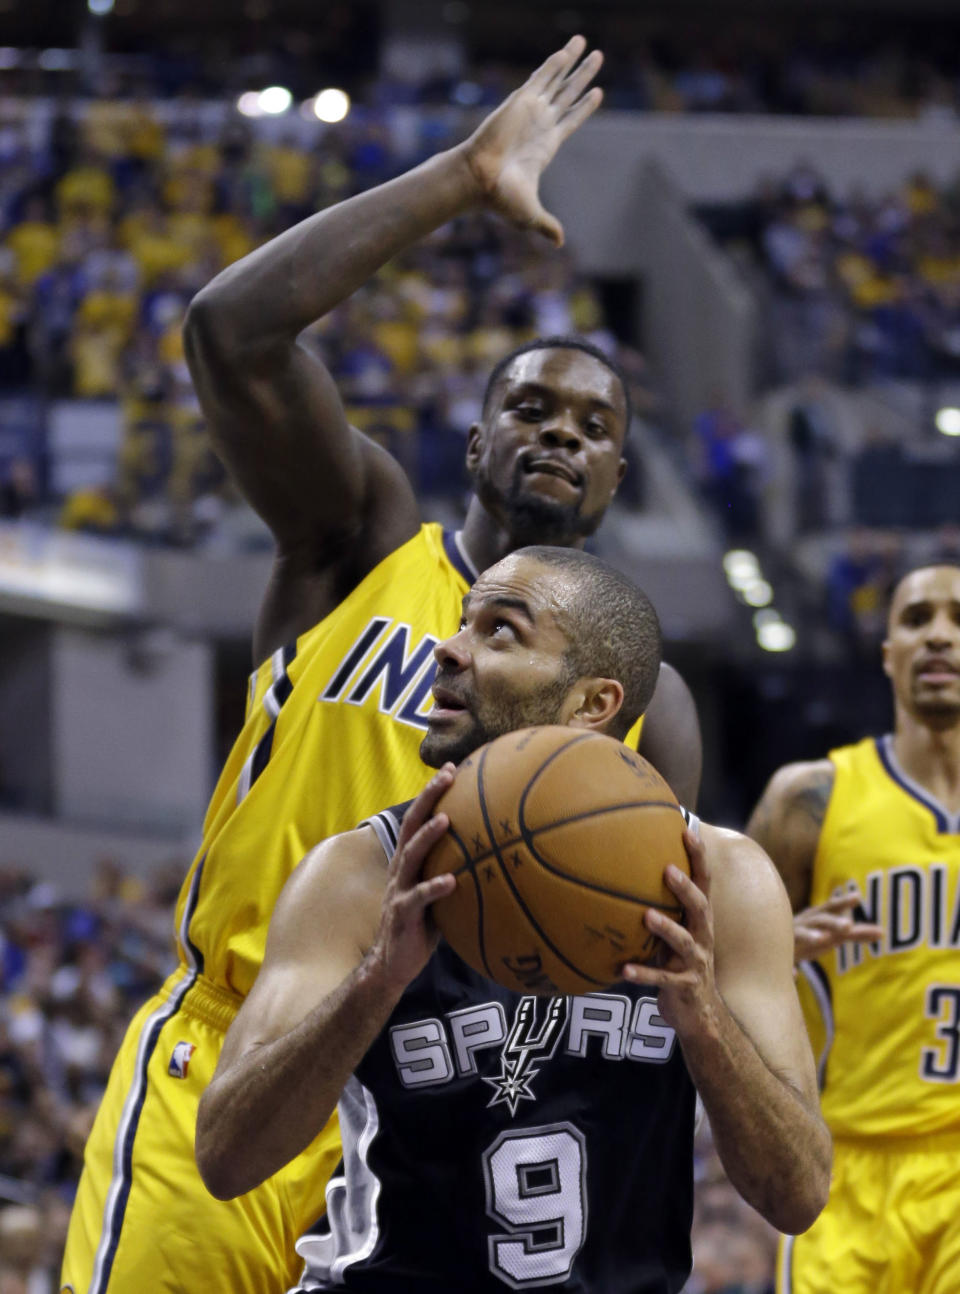 San Antonio Spurs guard Tony Parker (9) looks to shoot under Indiana Pacers guard Lance Stephenson in the second half of an NBA basketball game in Indianapolis, Monday, March 31, 2014. The Spurs defeated the Pacers 103-77. (AP Photo/Michael Conroy)